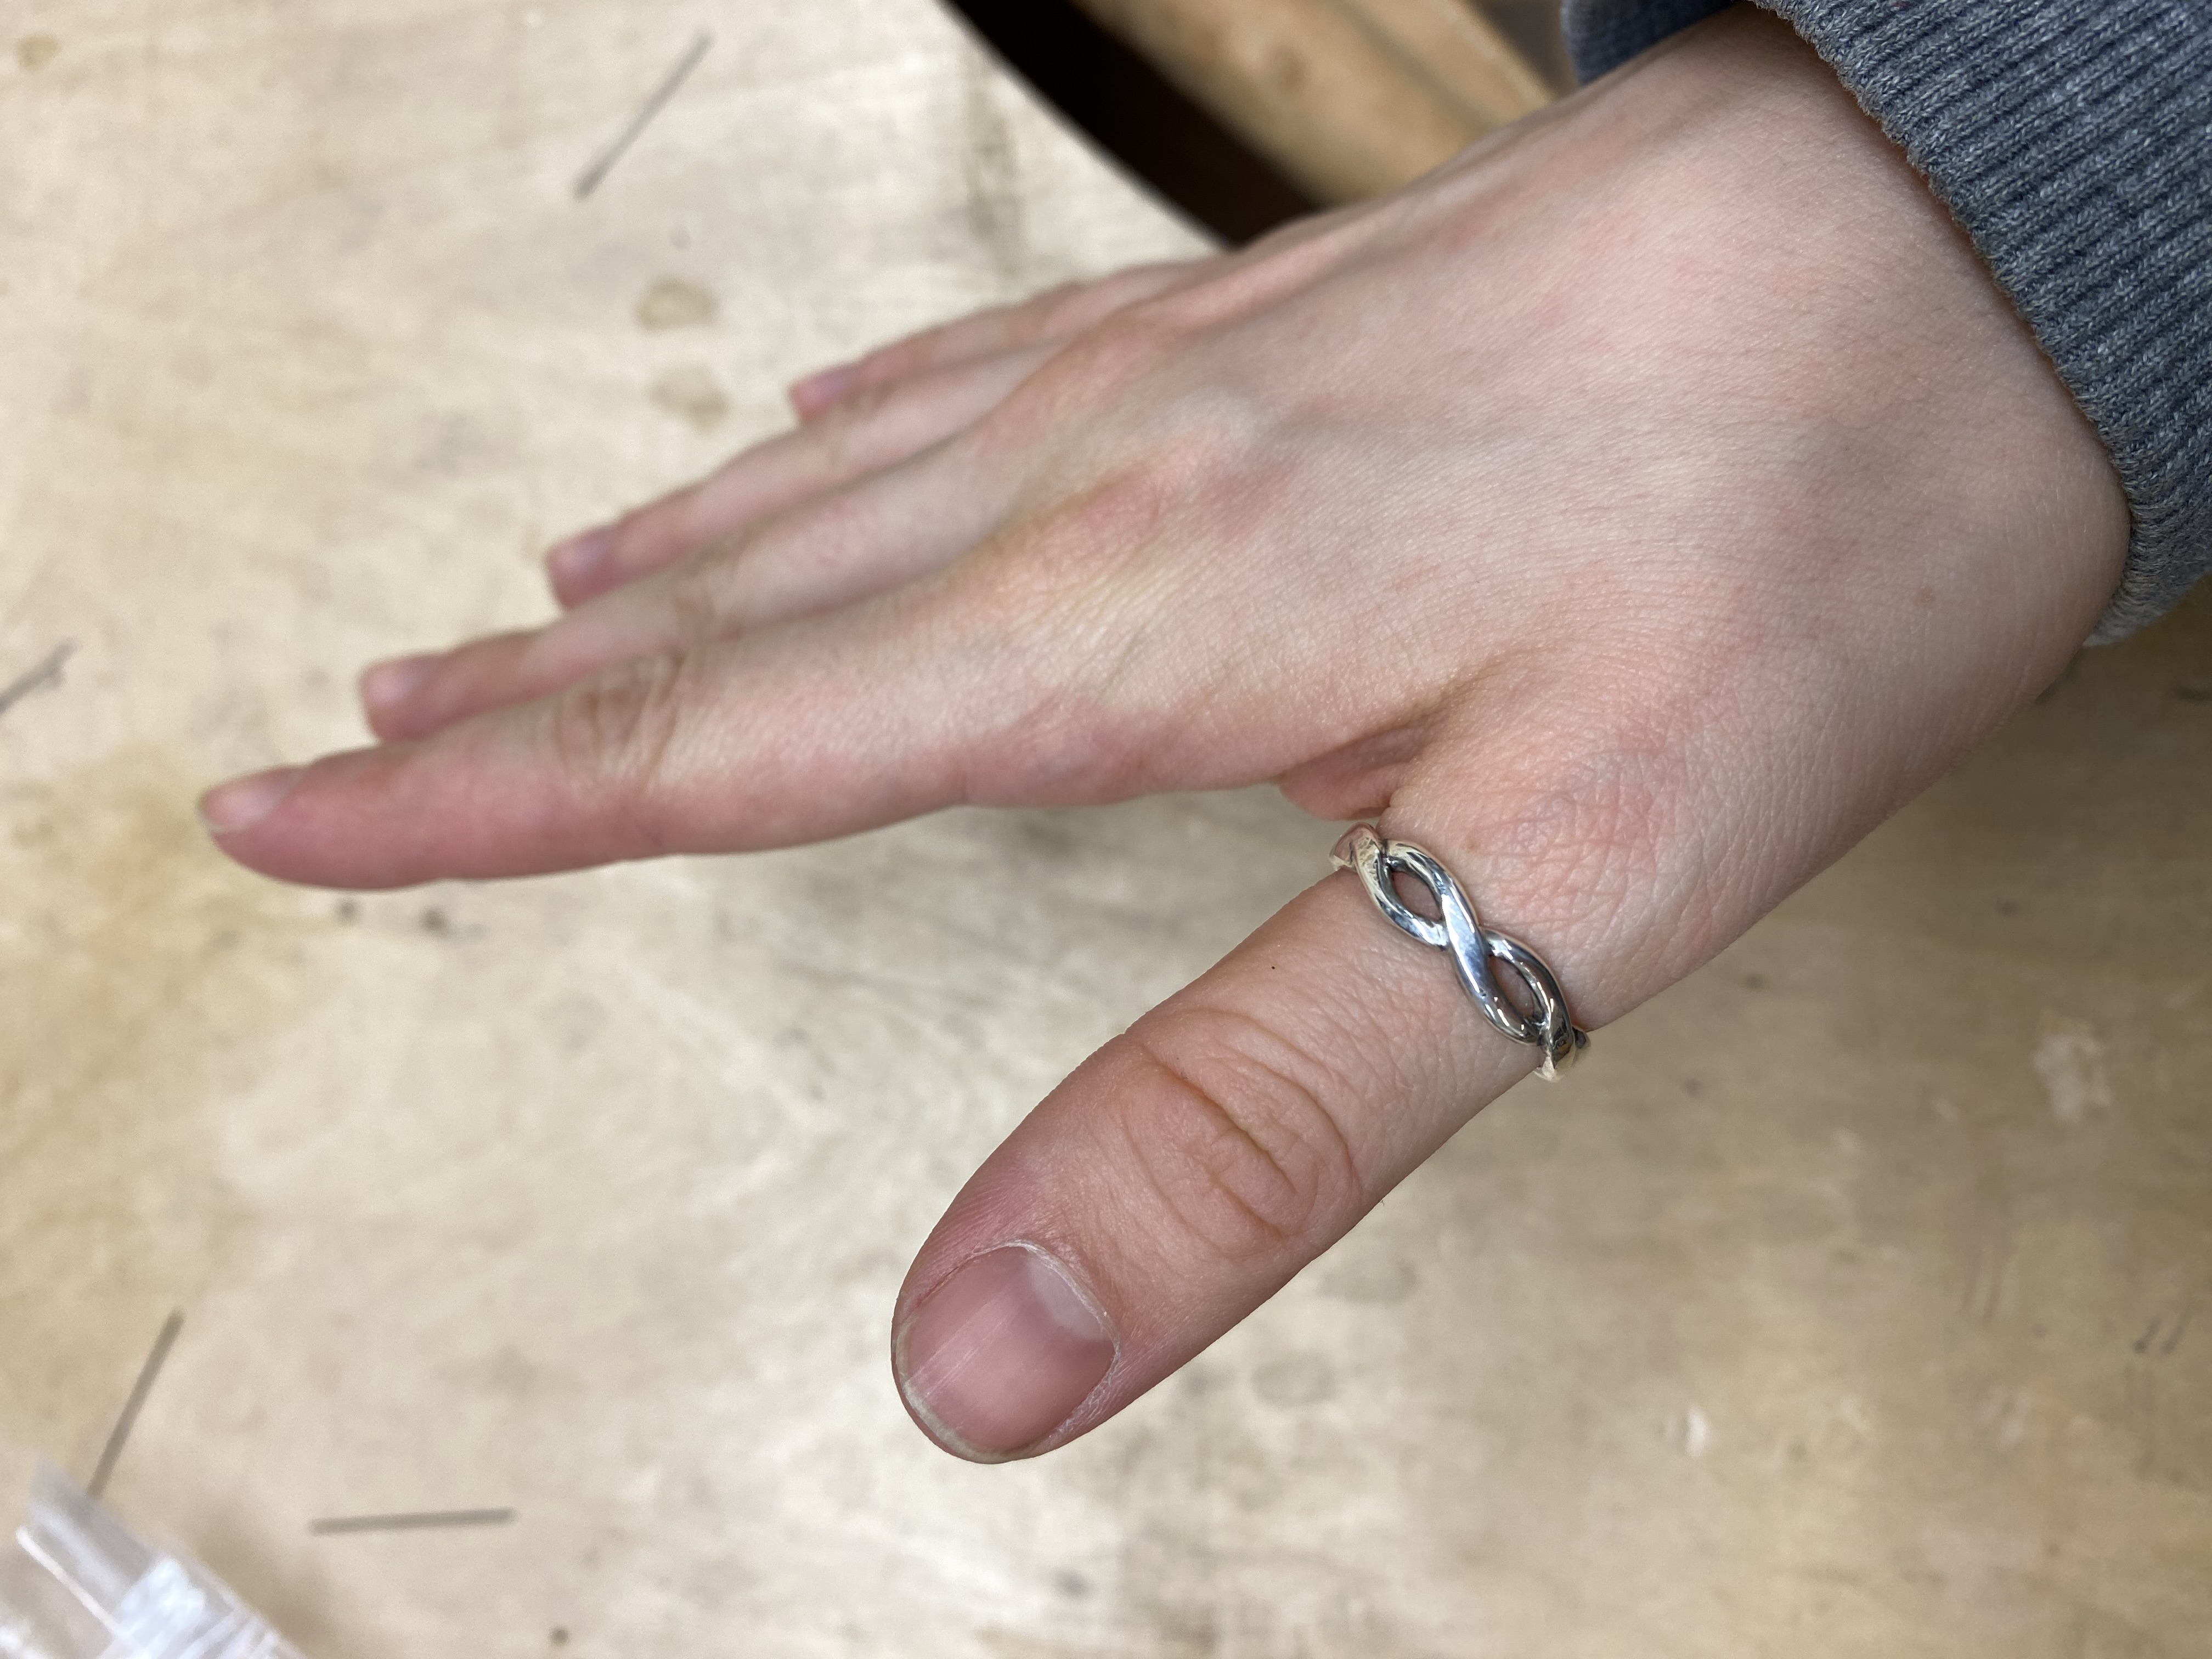 a ring where two wires intertwine to make it look like an infinity sign